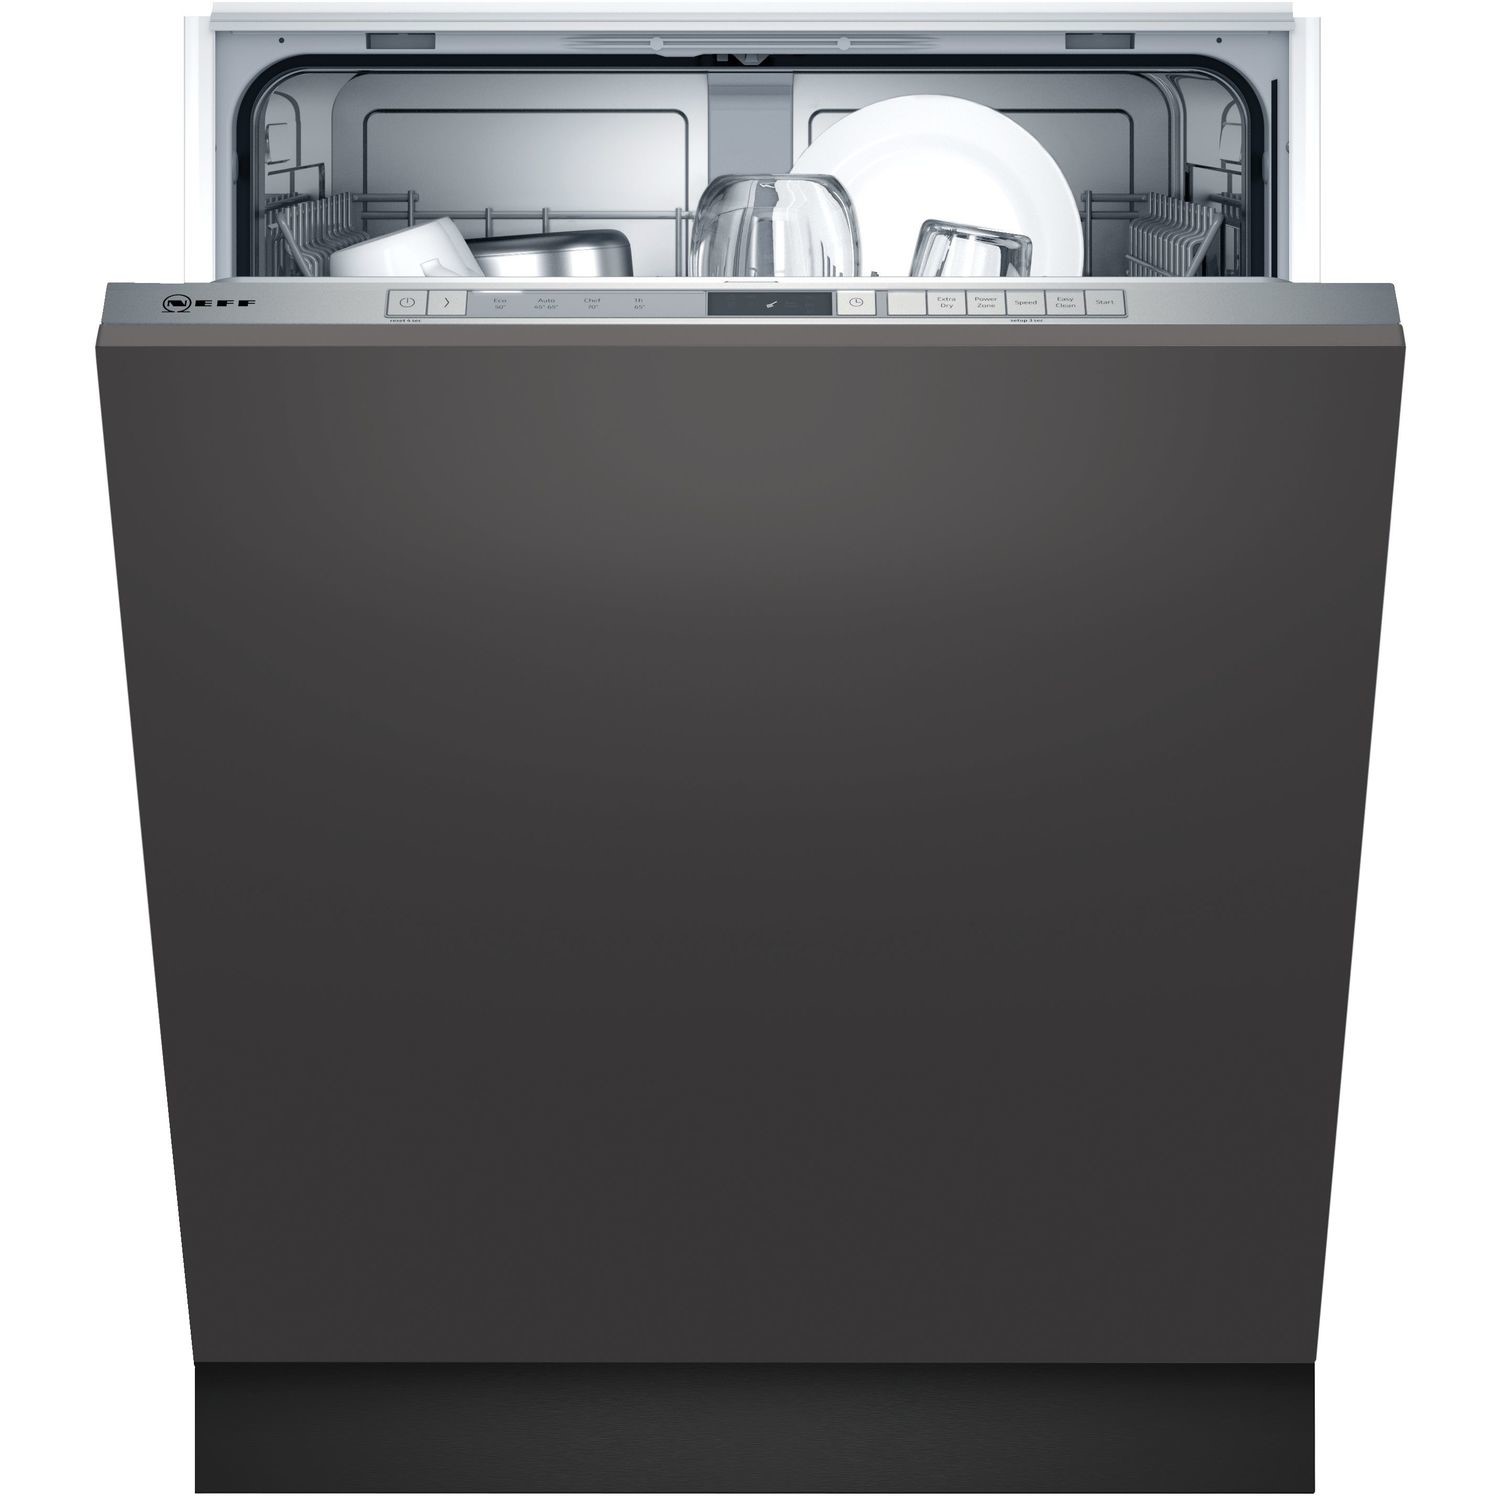 Neff N30 12 Place Settings Fully Integrated Dishwasher